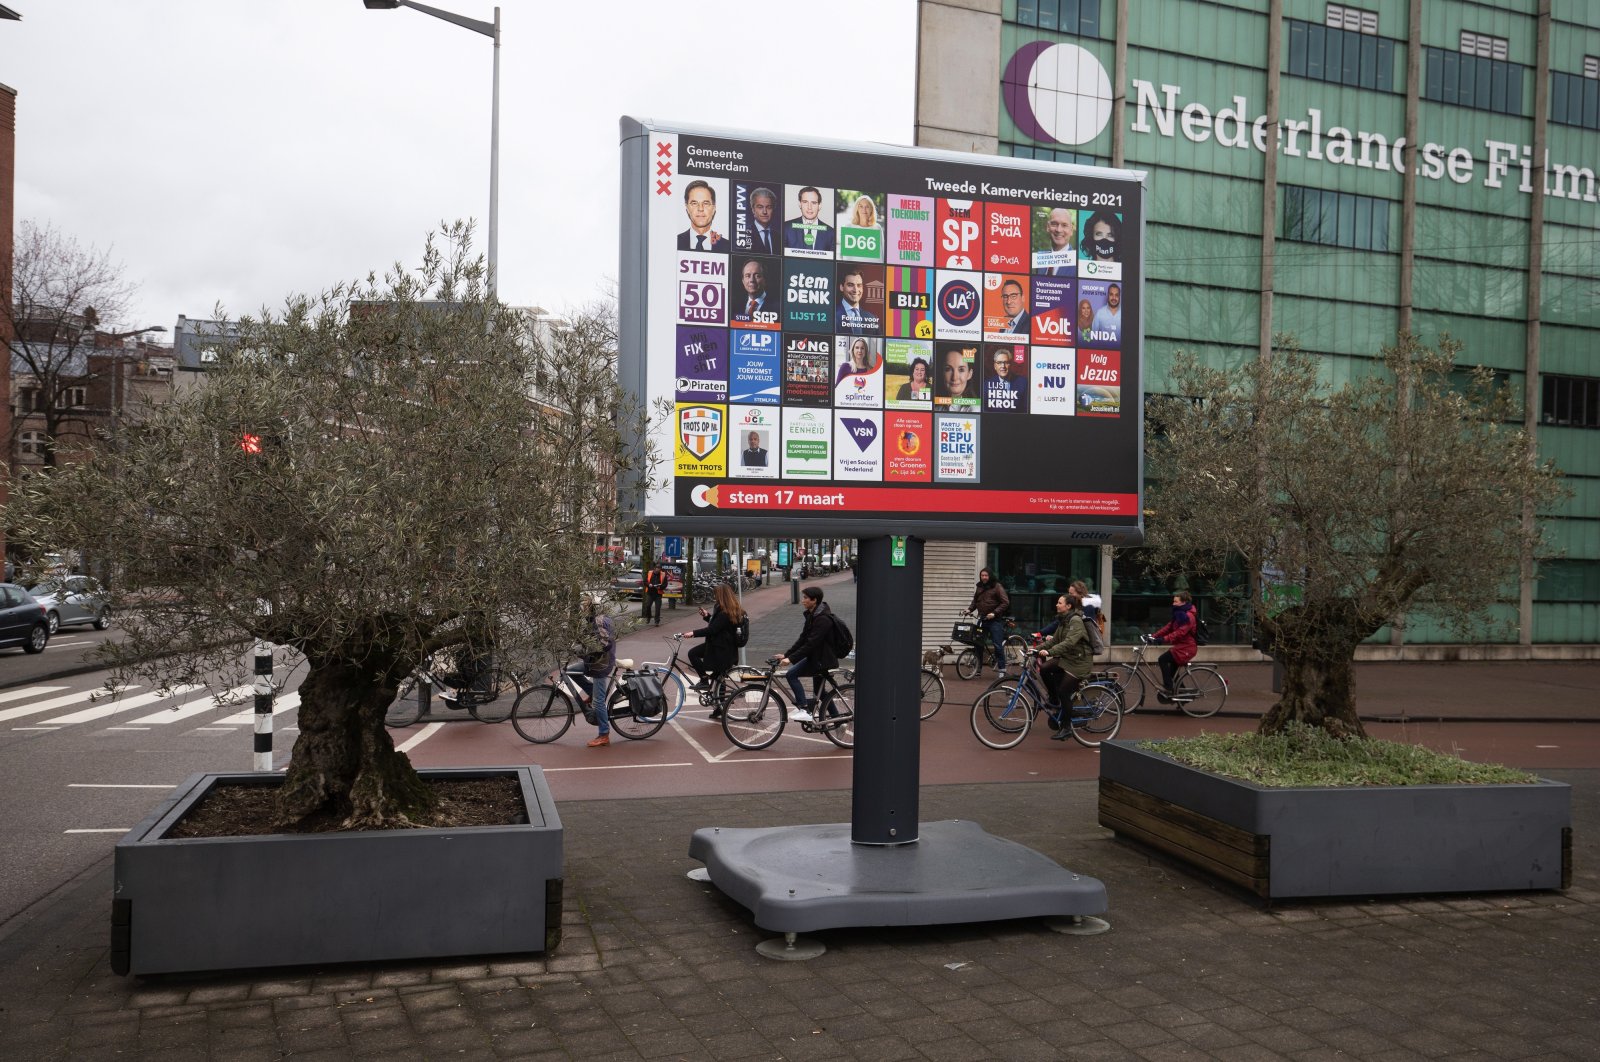 Cyclists at a road crossing near Dutch political party election campaign posters on a billboard in Amsterdam, Netherlands, on Tuesday, March 9, 2021. (Getty Images)